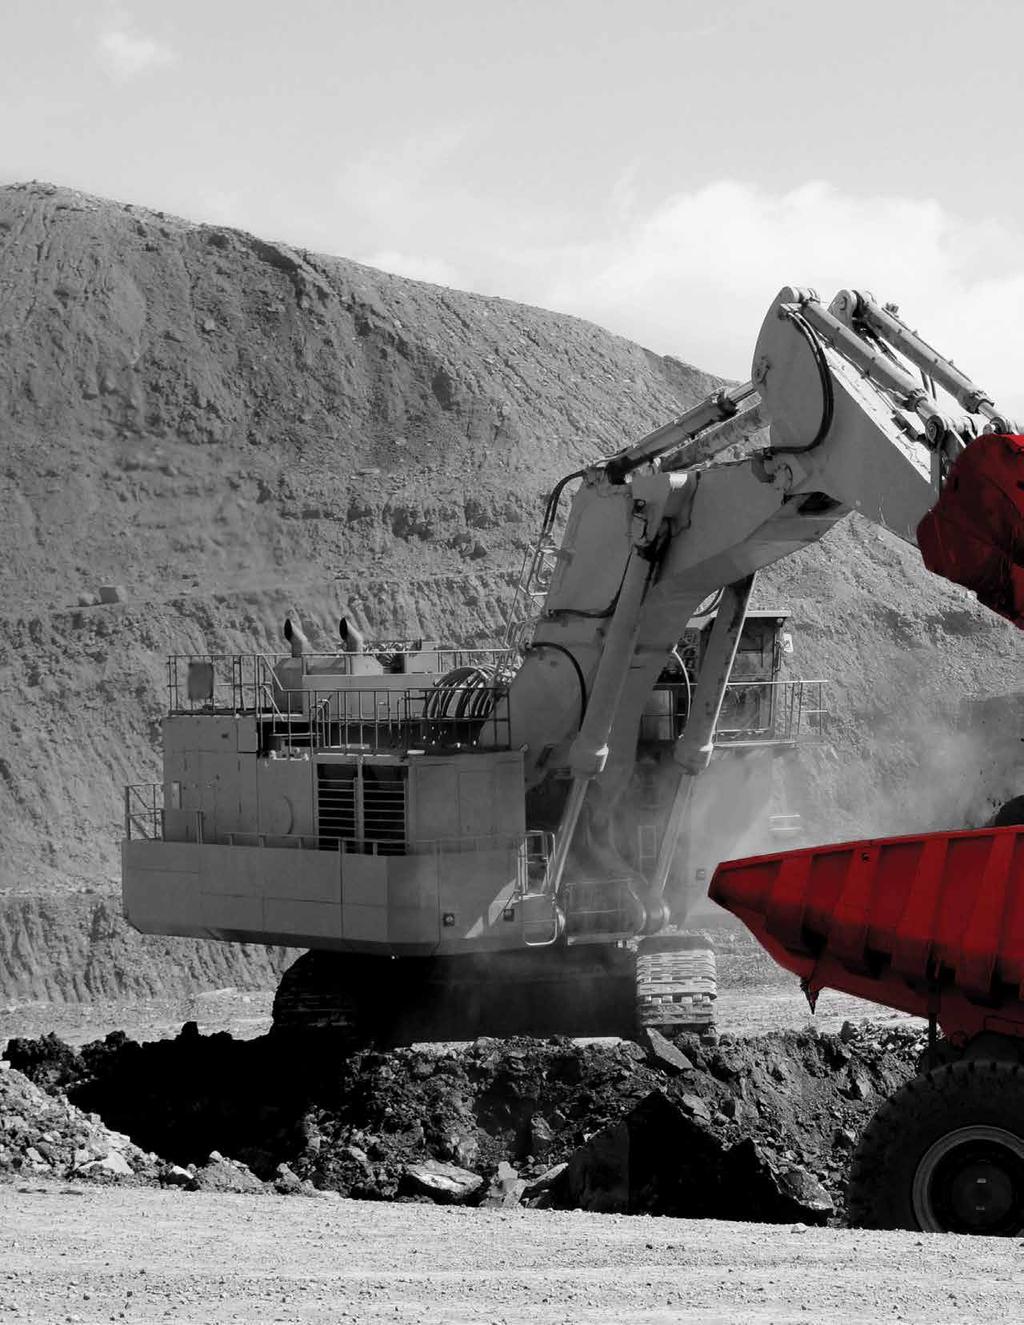 ESCO ESCO TRUSTED TRUSTED AT SAFE AT SAFE AND AND PRODUCTIVE MINES MINES WORLDWIDE EFFICIENT LOADING, HAULING AND DUMPING.